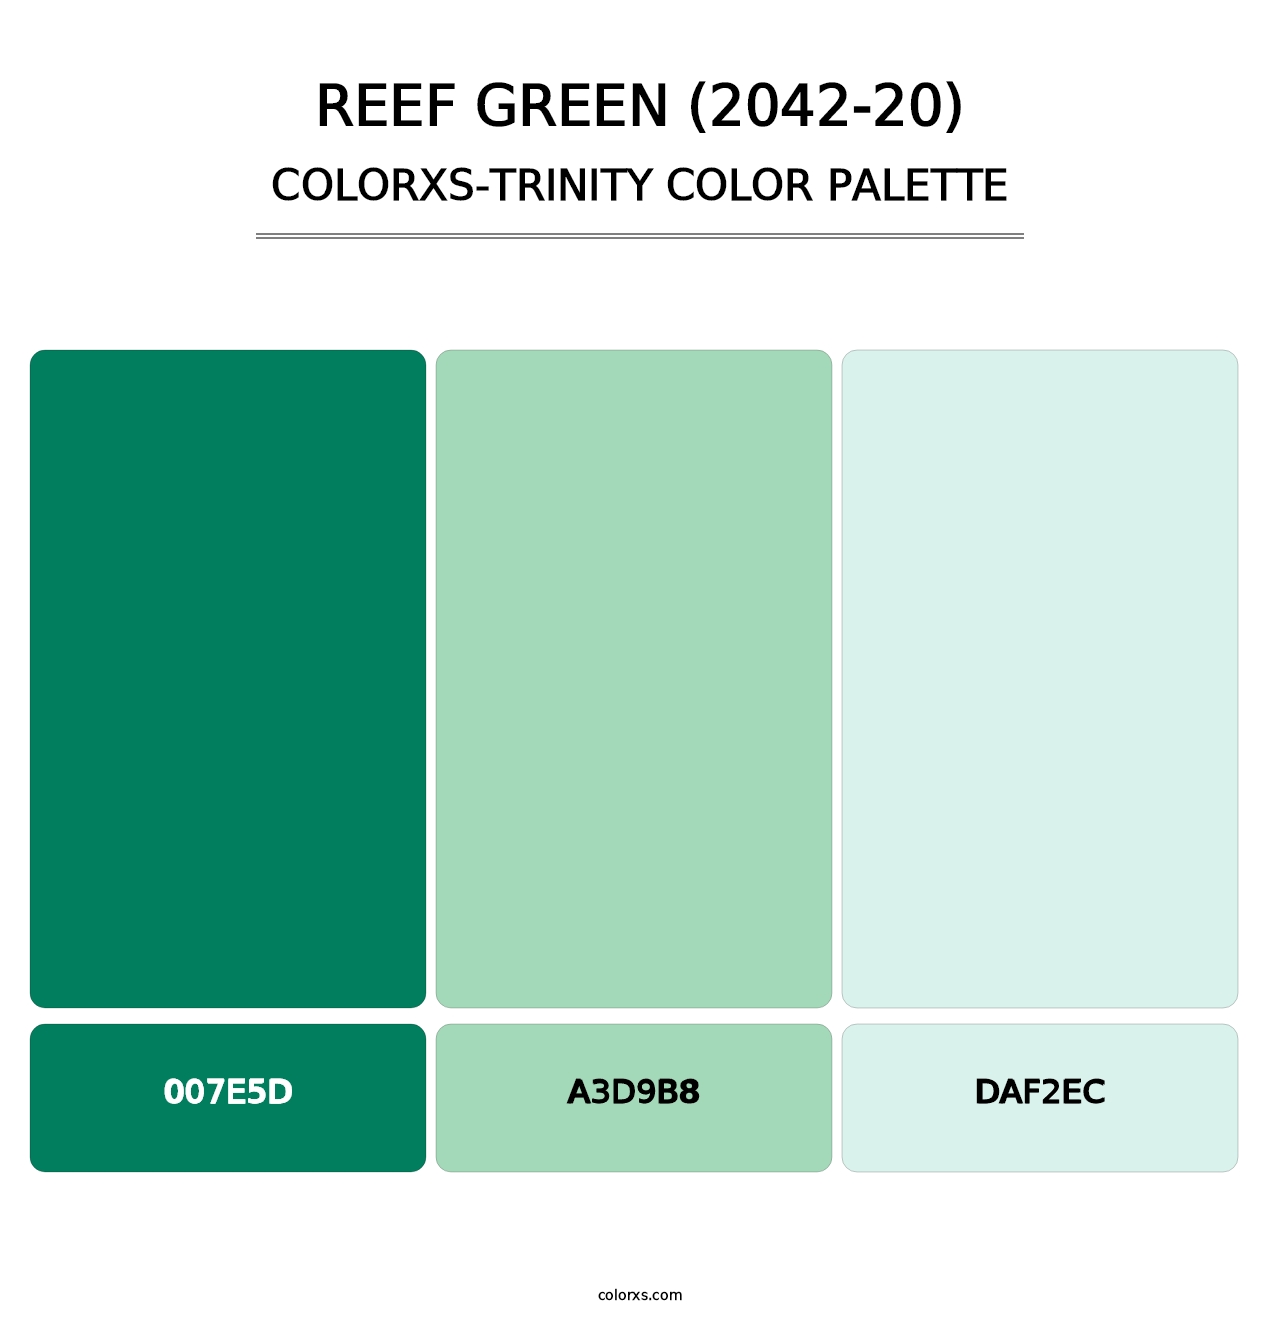 Reef Green (2042-20) - Colorxs Trinity Palette